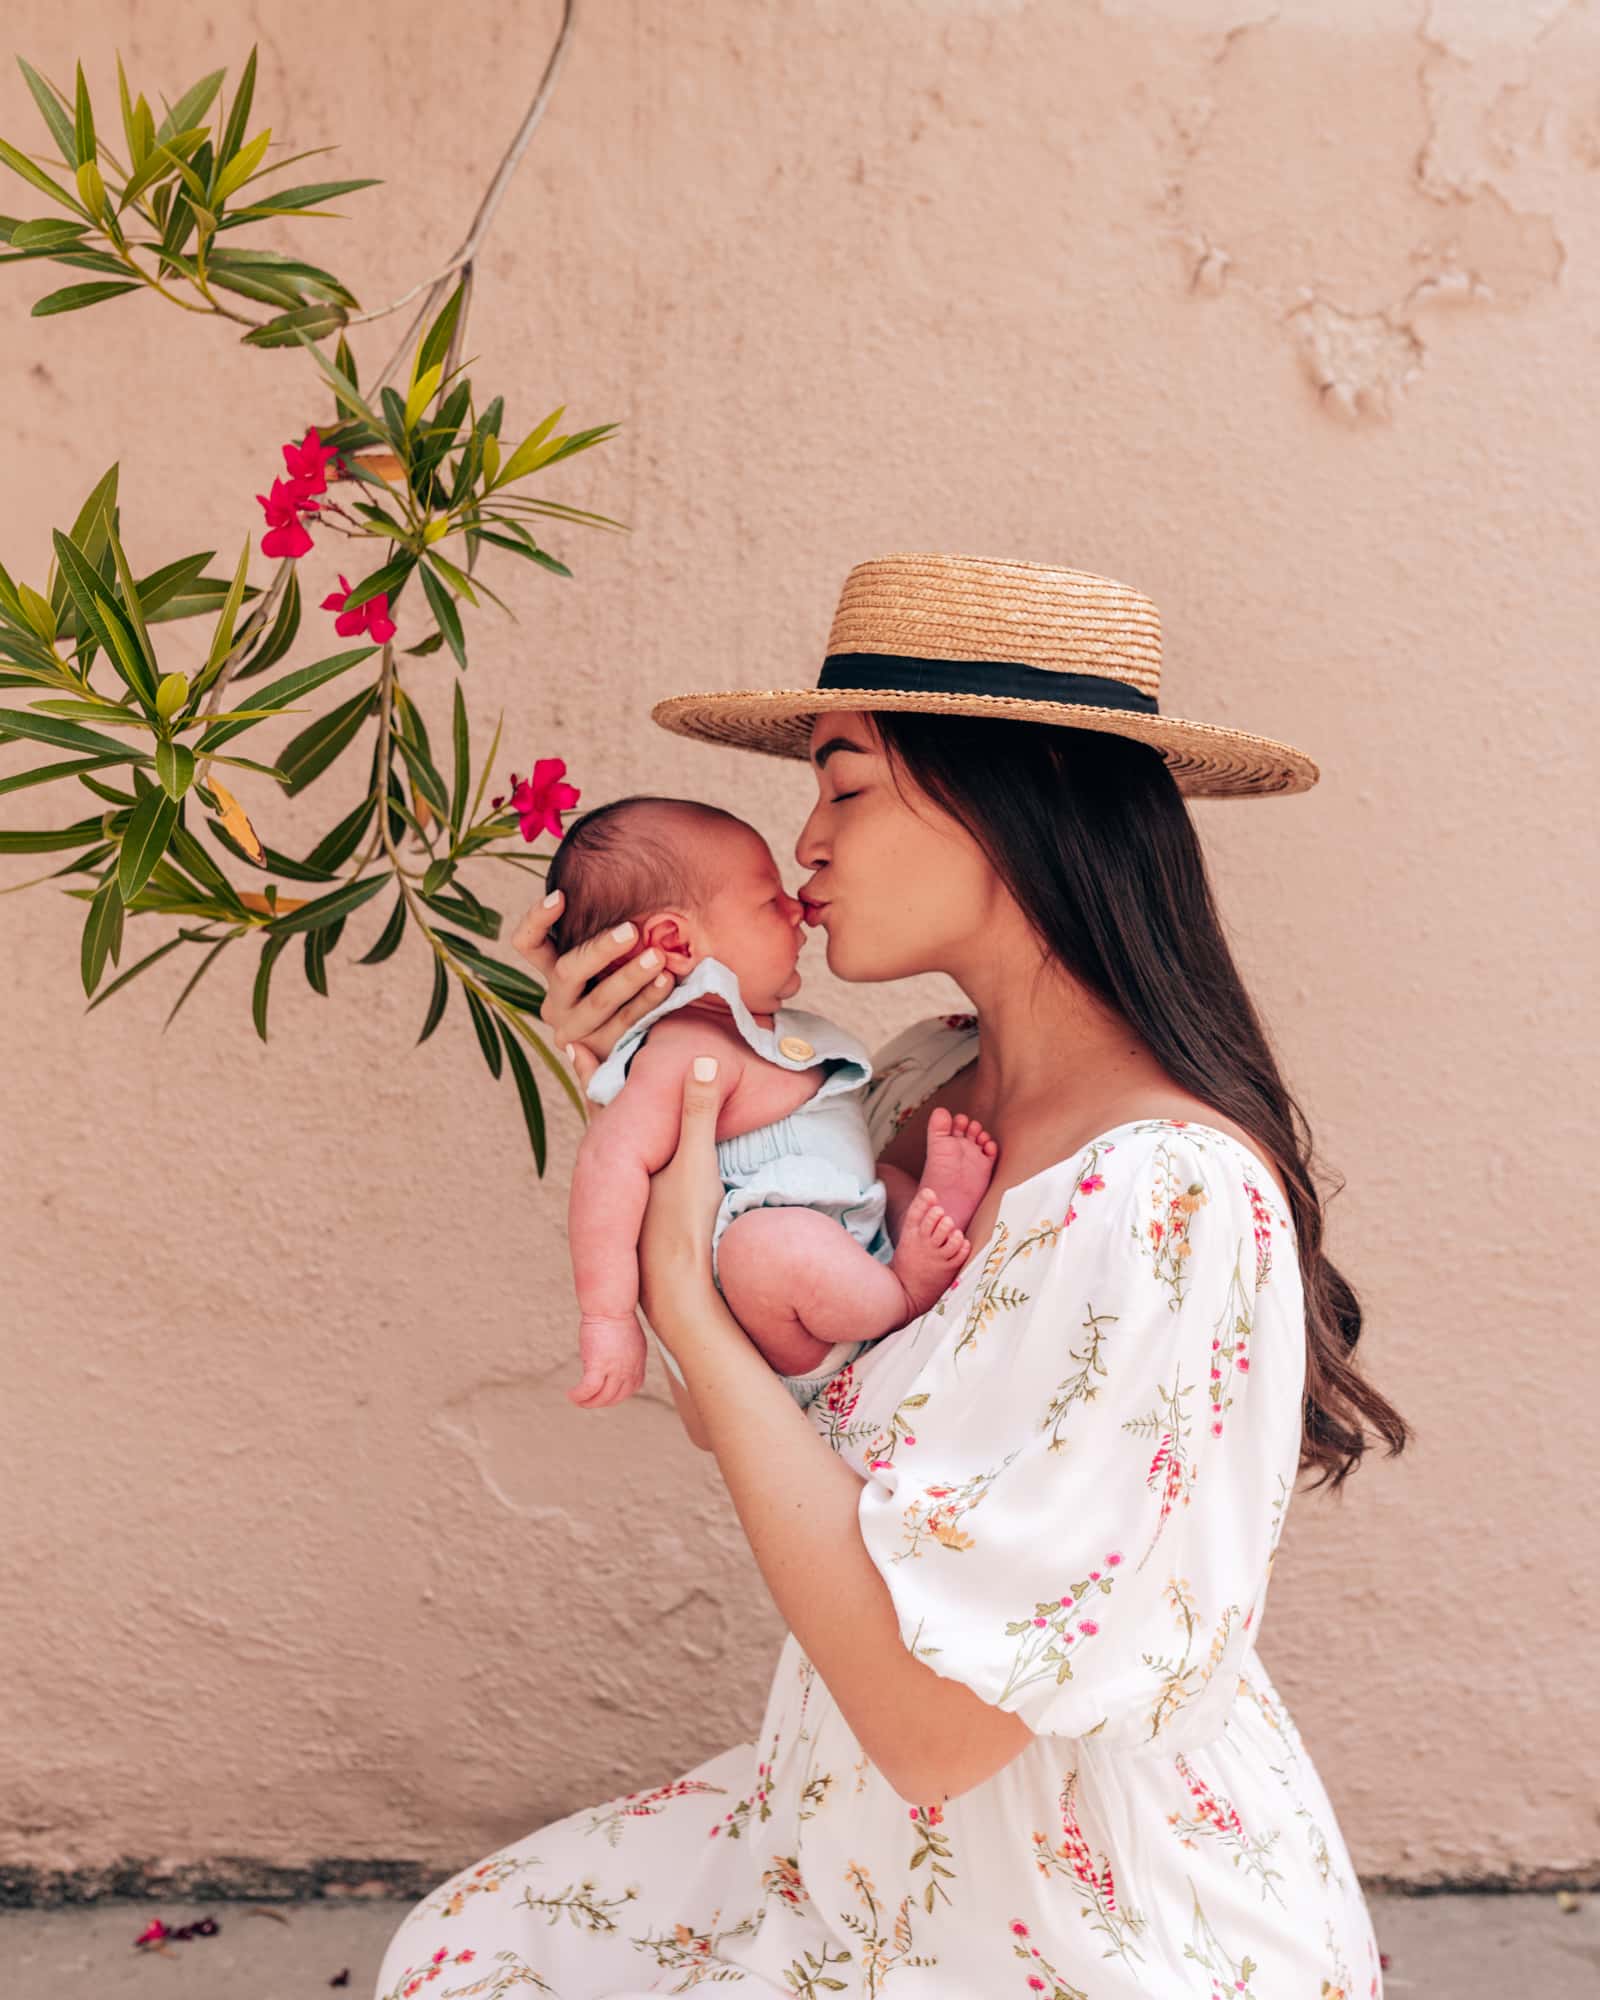 Spring Baby Photoshoot Ideas - Mom and Baby Floral